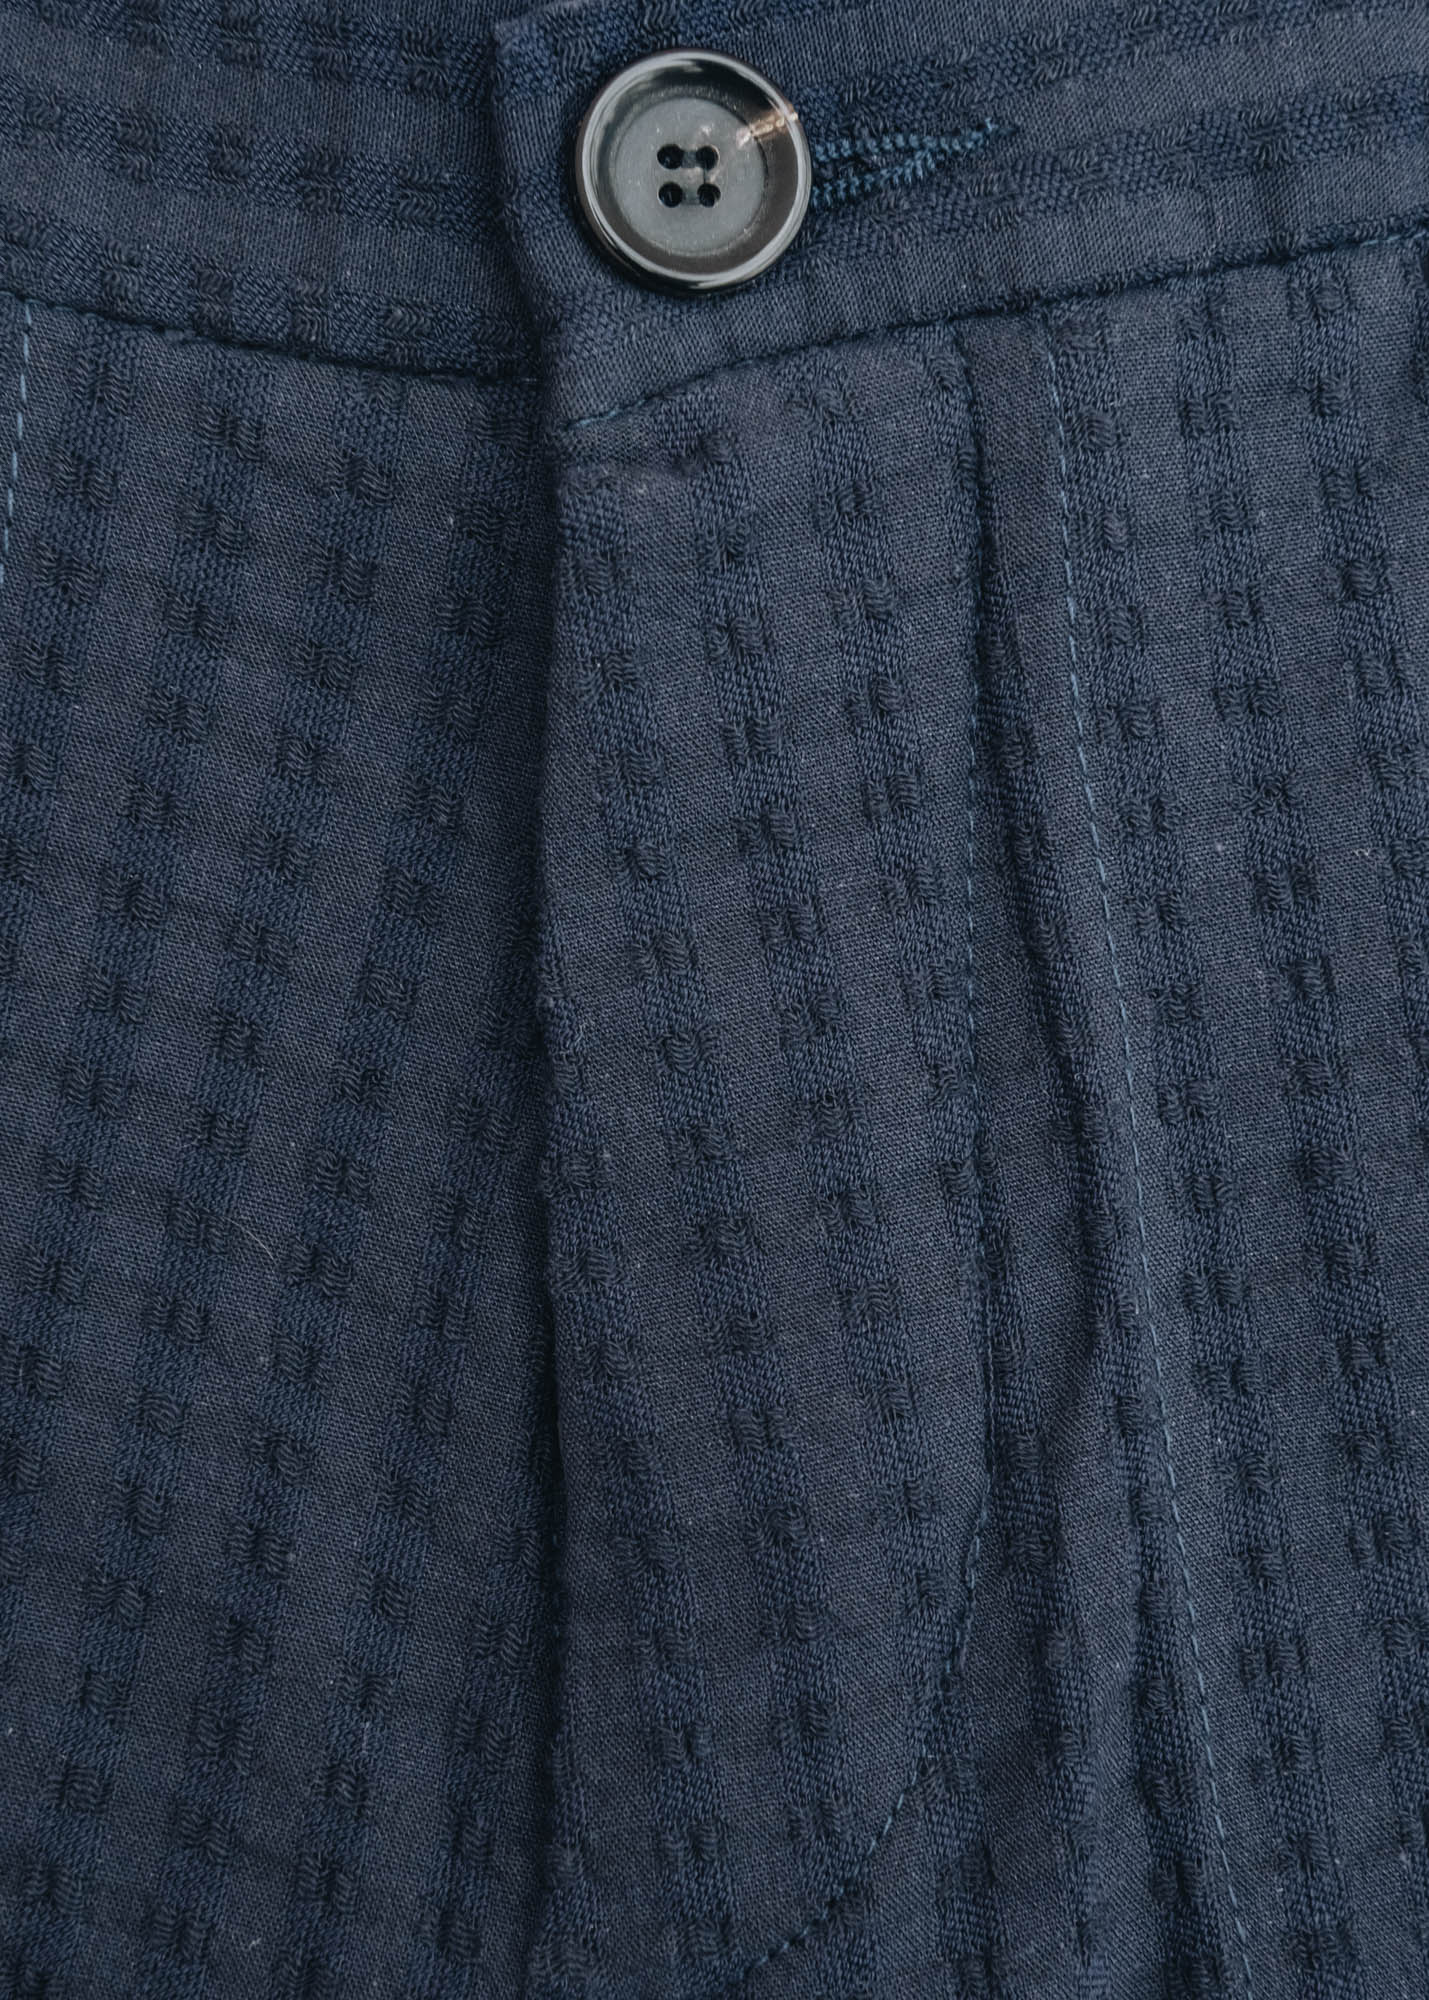 Judo Trousers in Navy